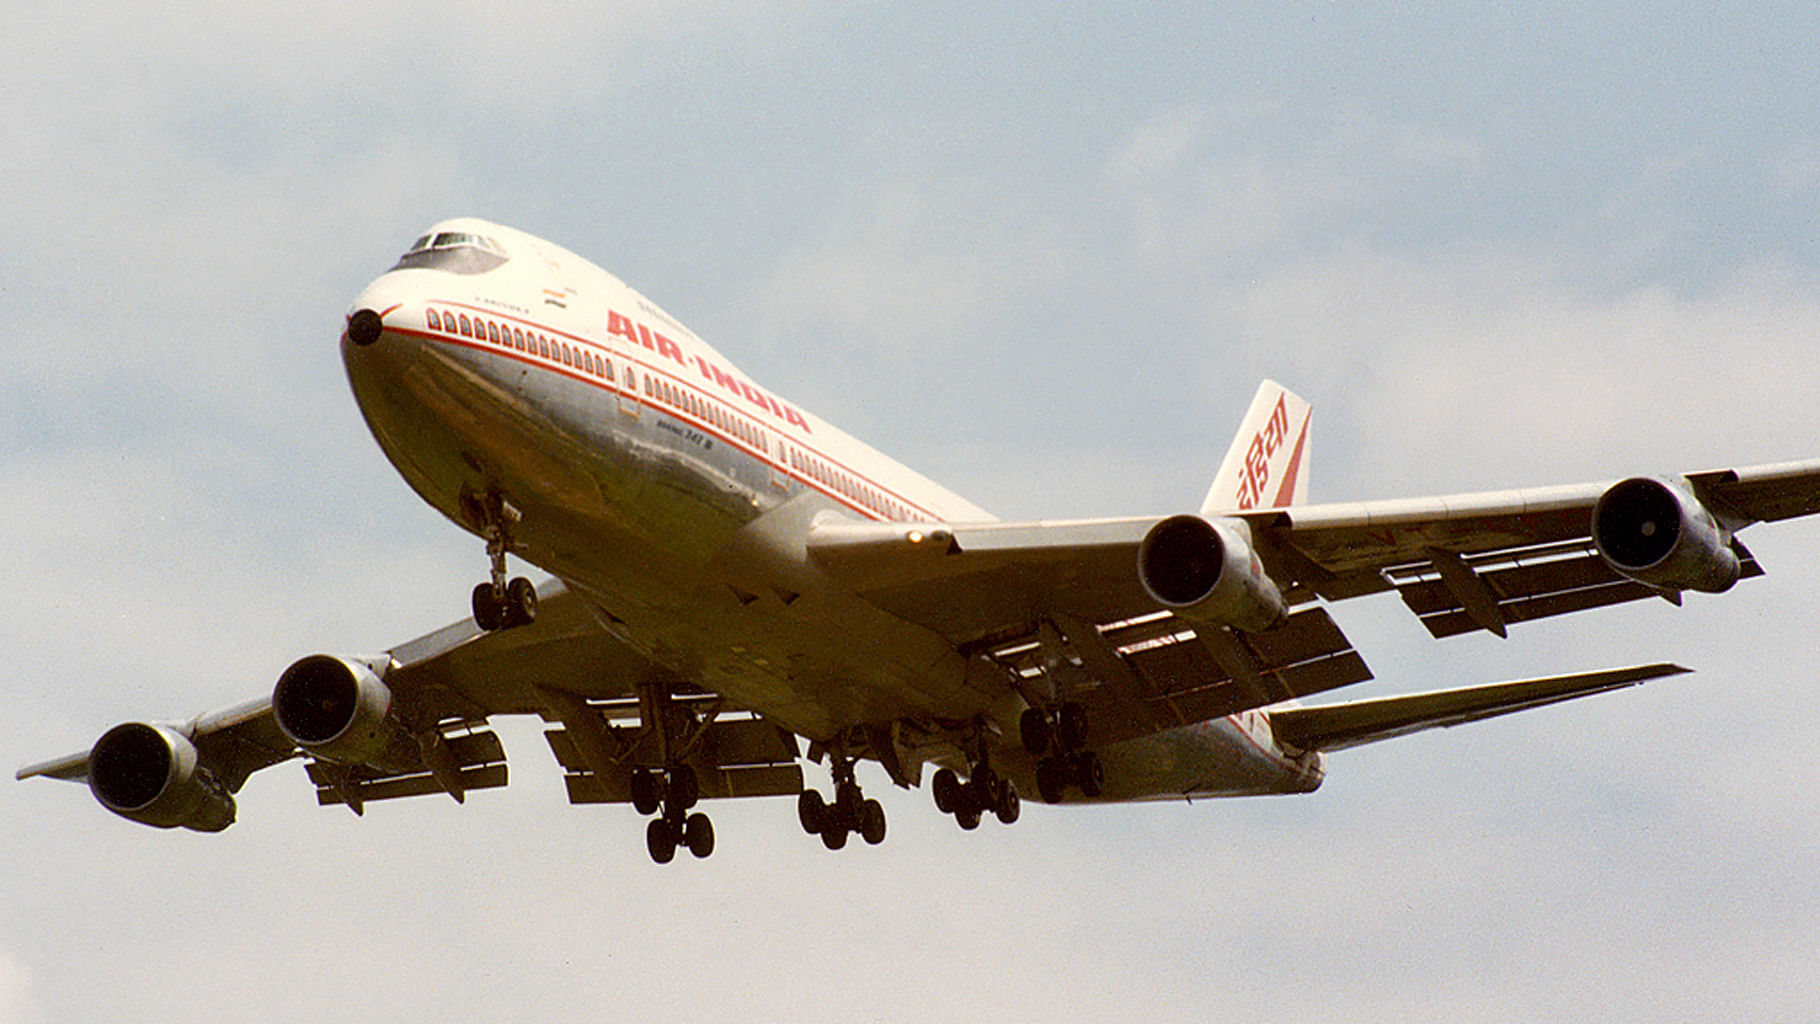 The Air India Kanishka landing at London’s Heathrow Airport two weeks before its destruction.